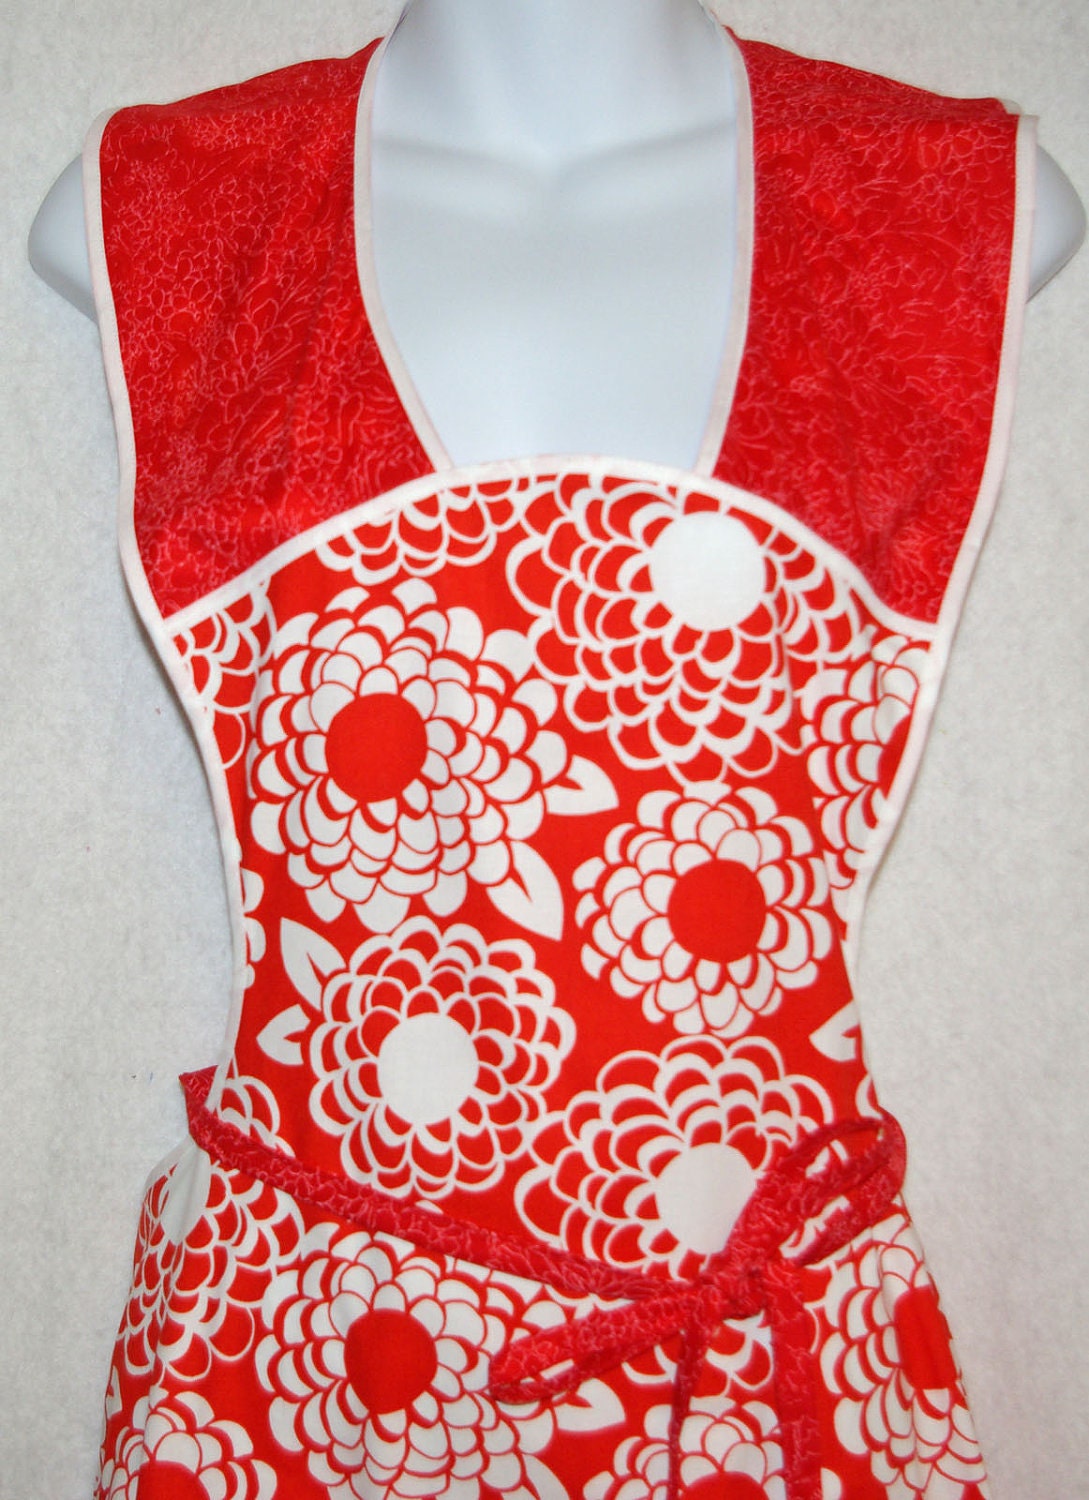 Red Dahlia Vintage Style Apron Free Shipping - AGiftToTreasure